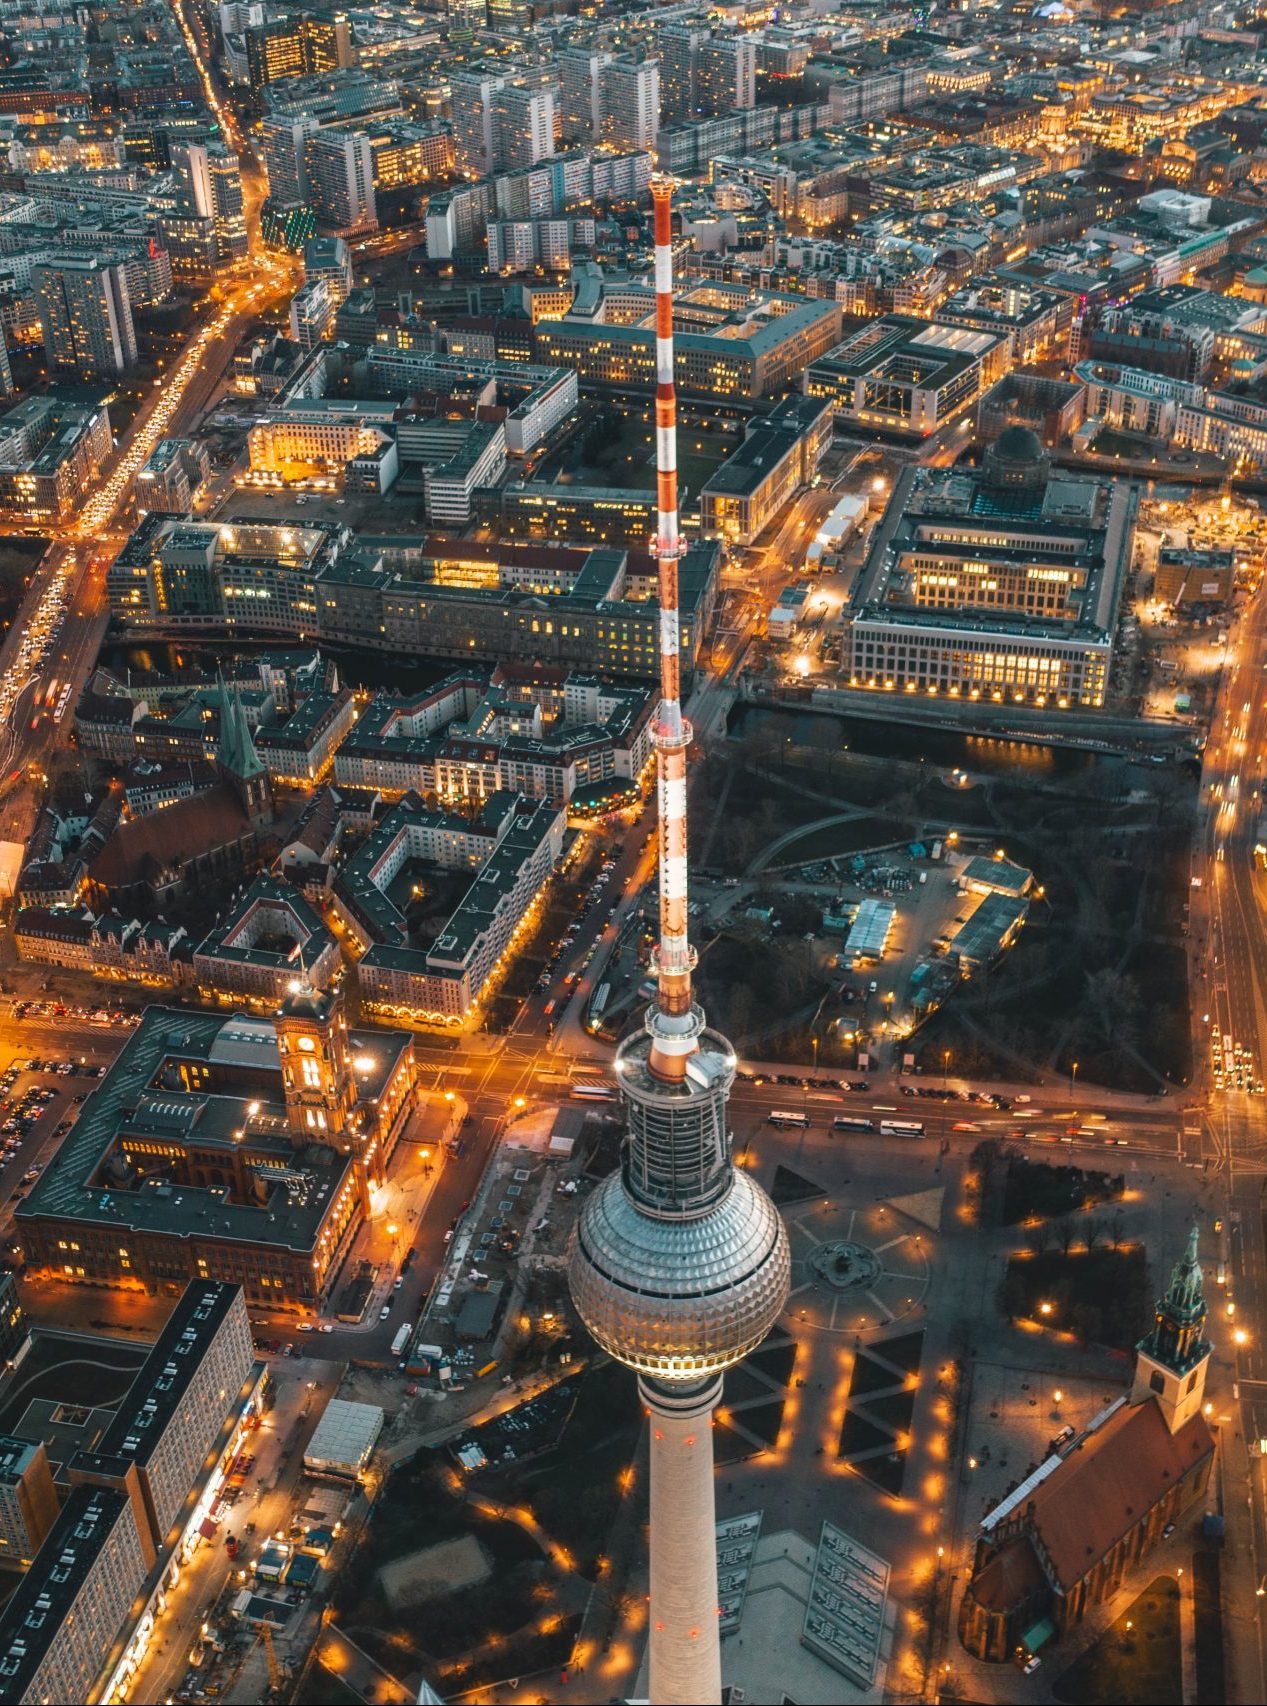 Berlin TV Tower as an Symbol of the Home of Acronym Europe GmbH